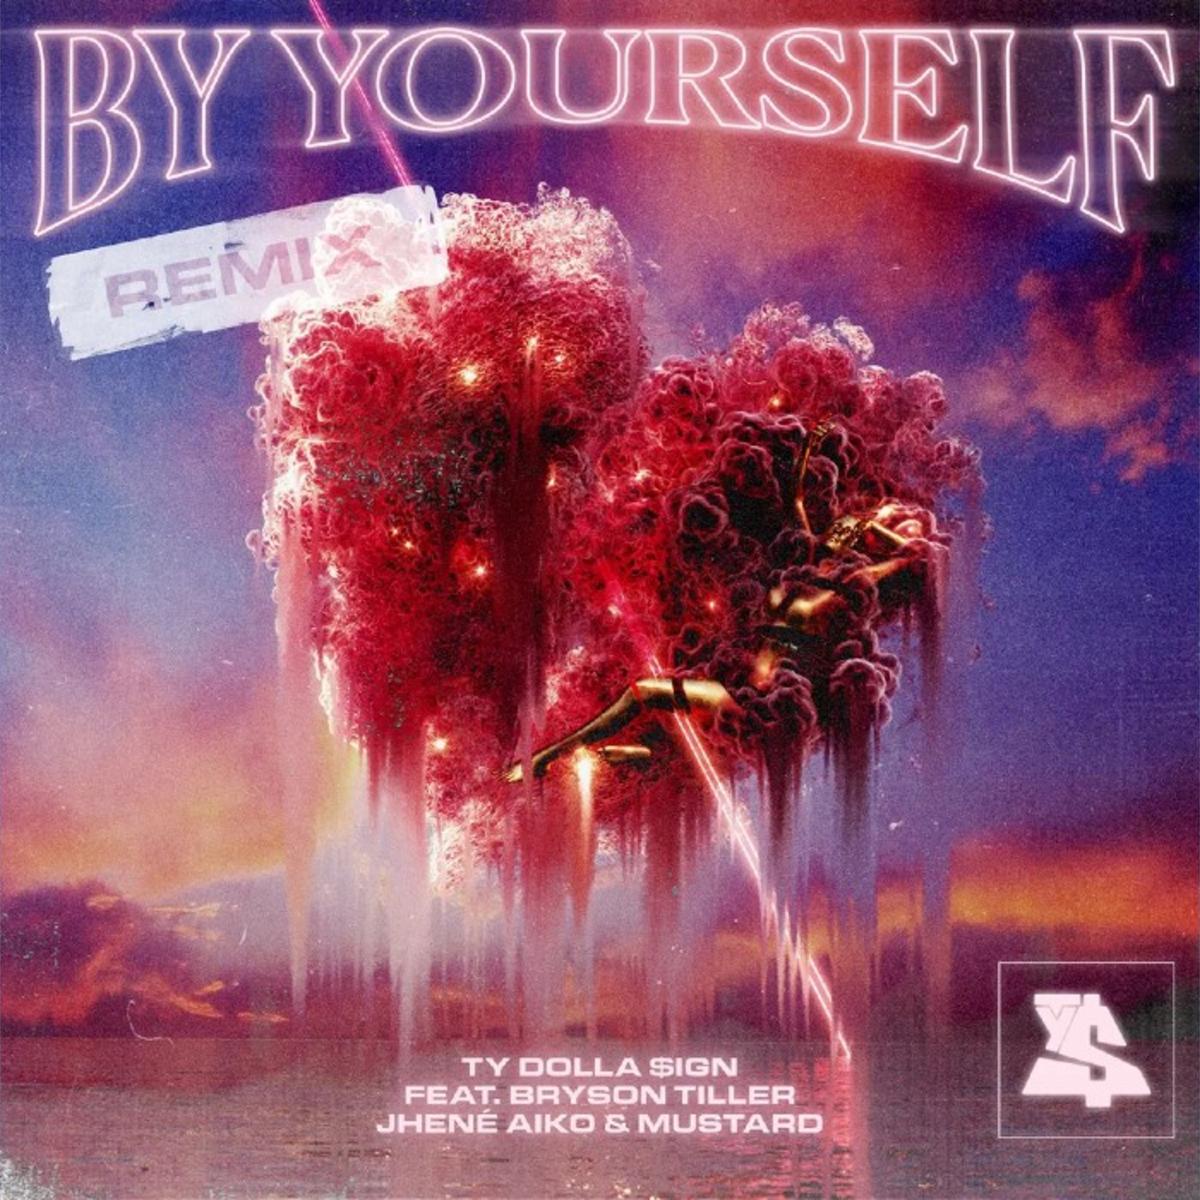 Ty Dolla $ign Adds Bryson Tiller To “By Yourself” With Mustard & Jhene Aiko